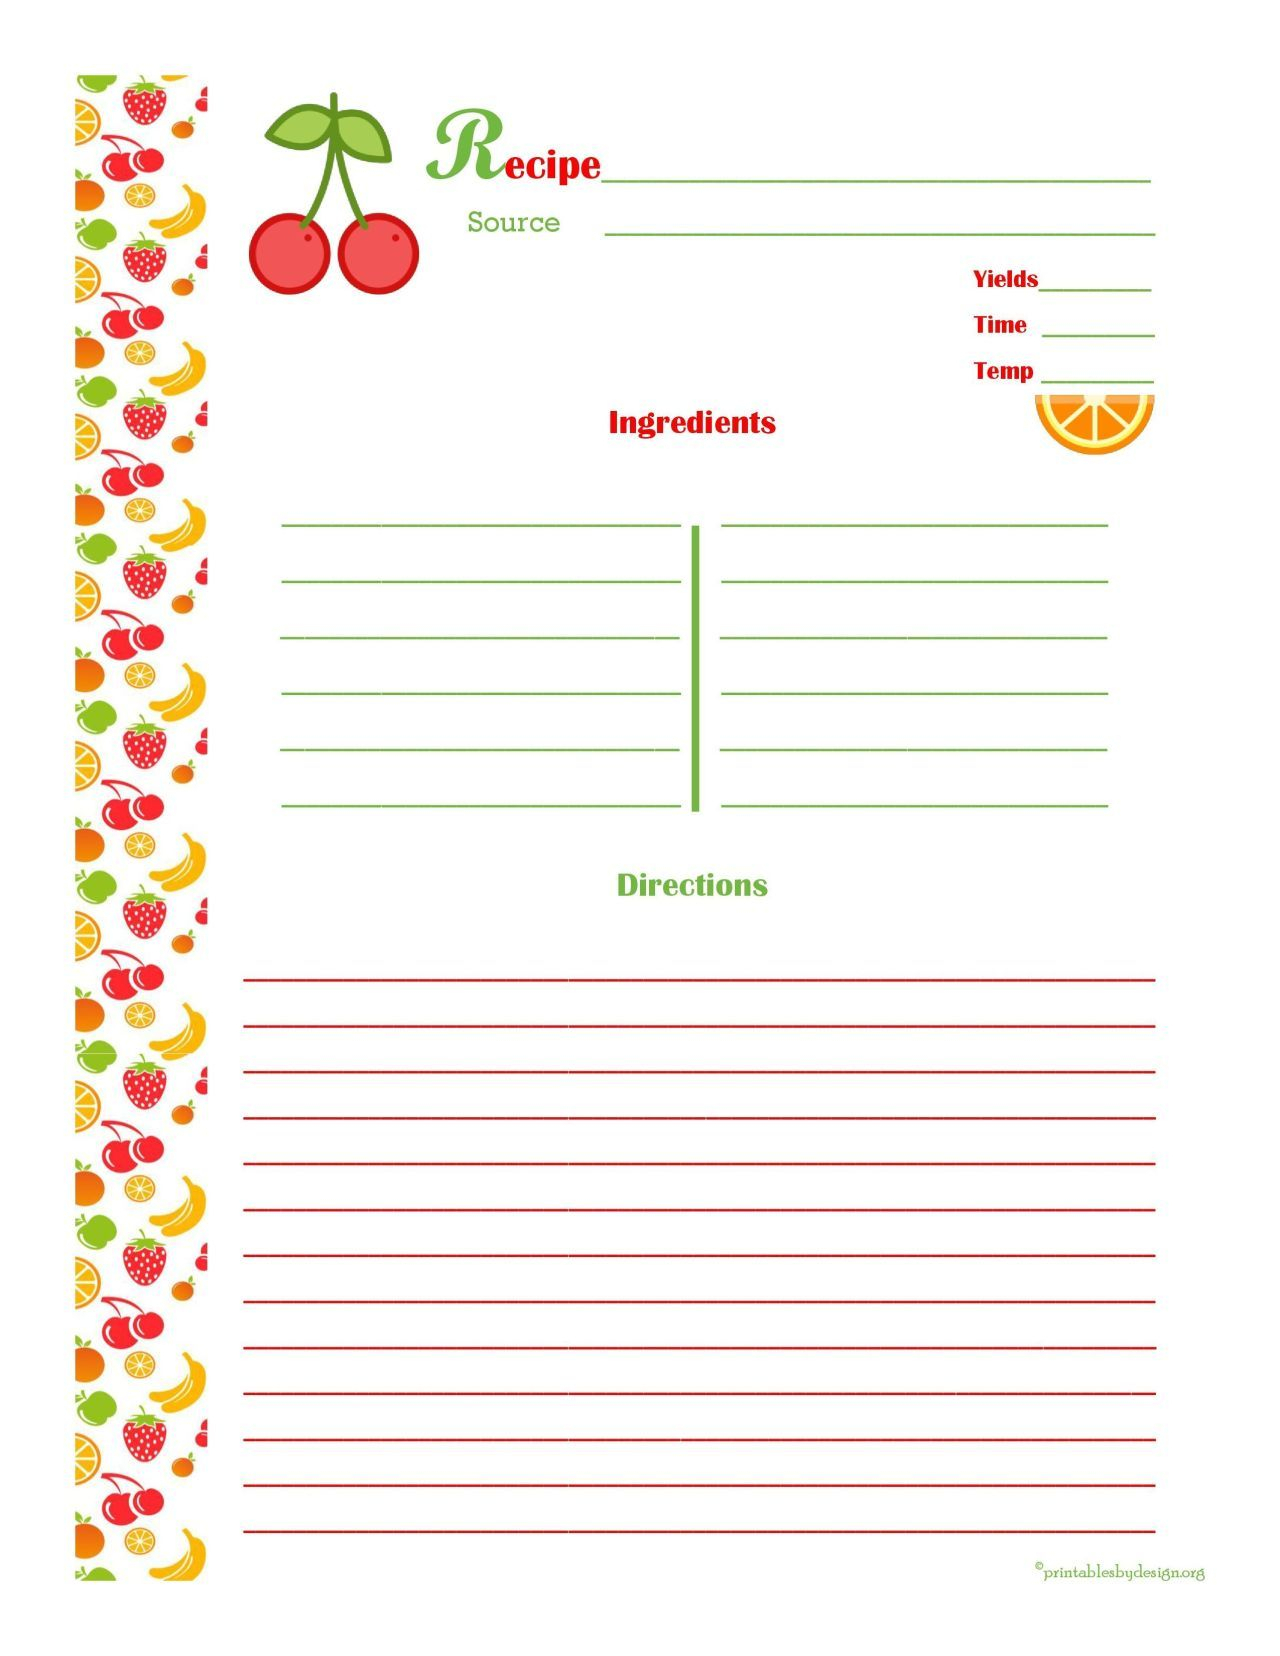 Free Editable Recipe Card Templates For Microsoft Word Inside Free Recipe Card Templates For Microsoft Word